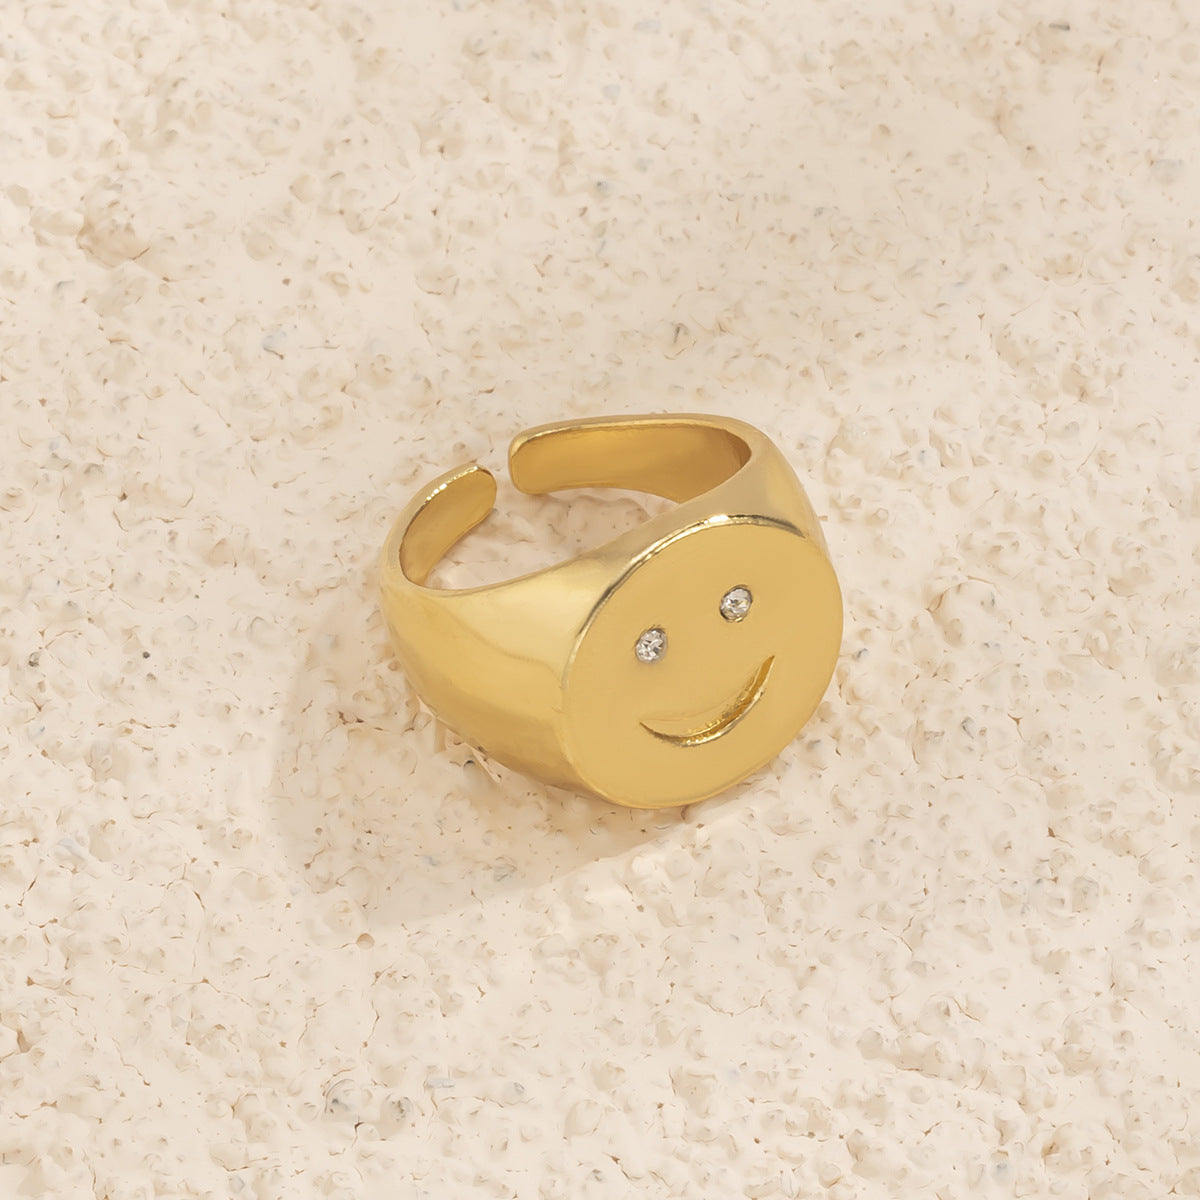 Heart-Shaped Retro Smiling Face Ring with Simple Handcrafted Details